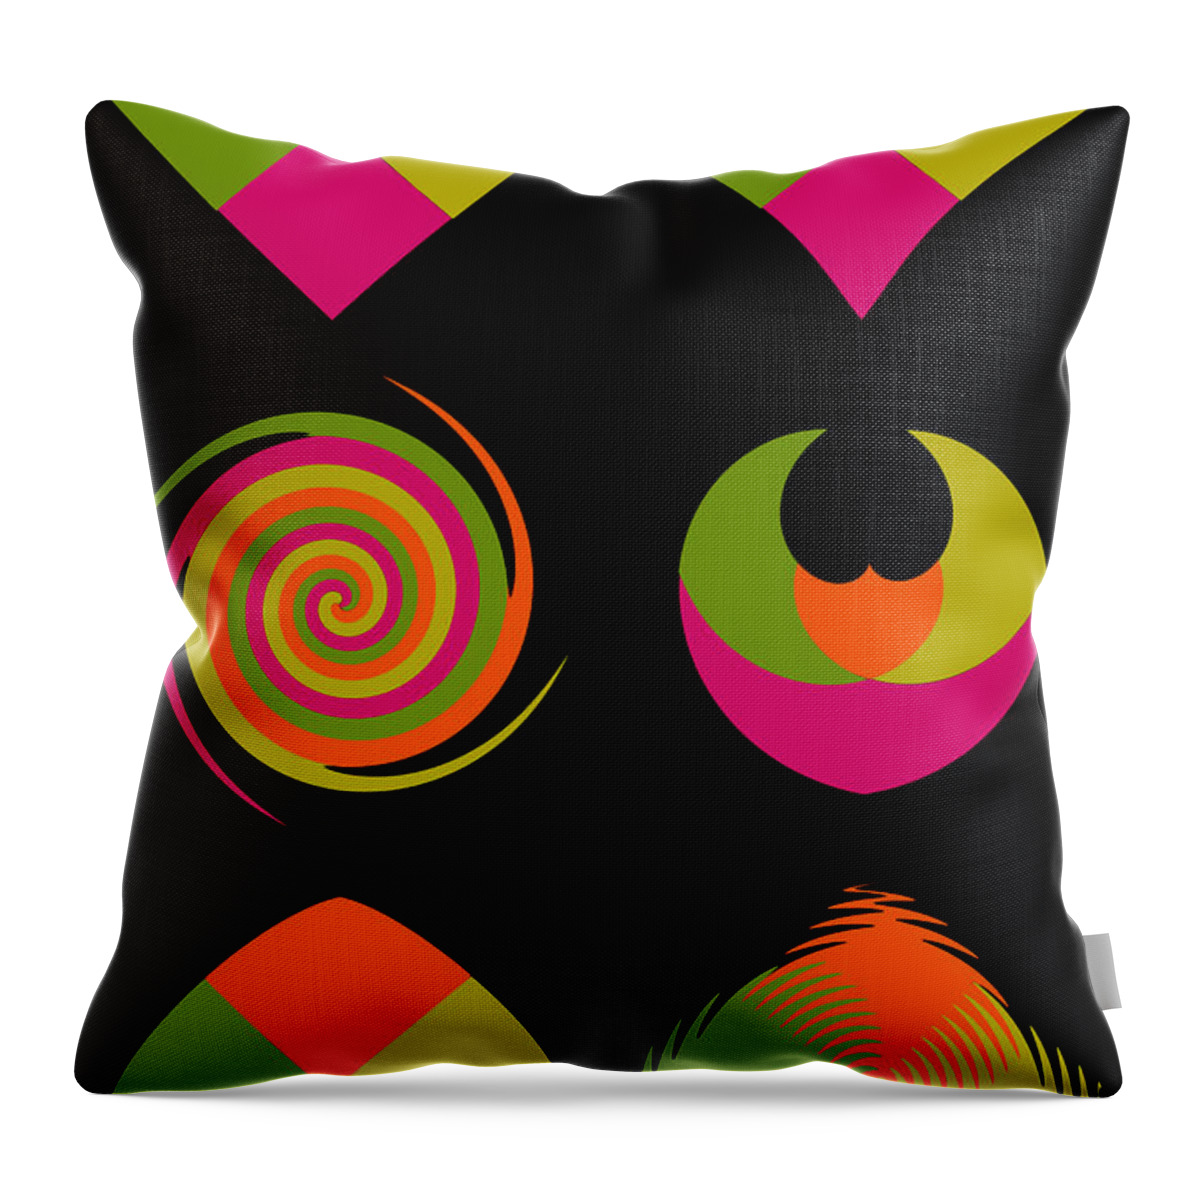 Six Squared Throw Pillow featuring the photograph Six Squared Collage by Steve Purnell